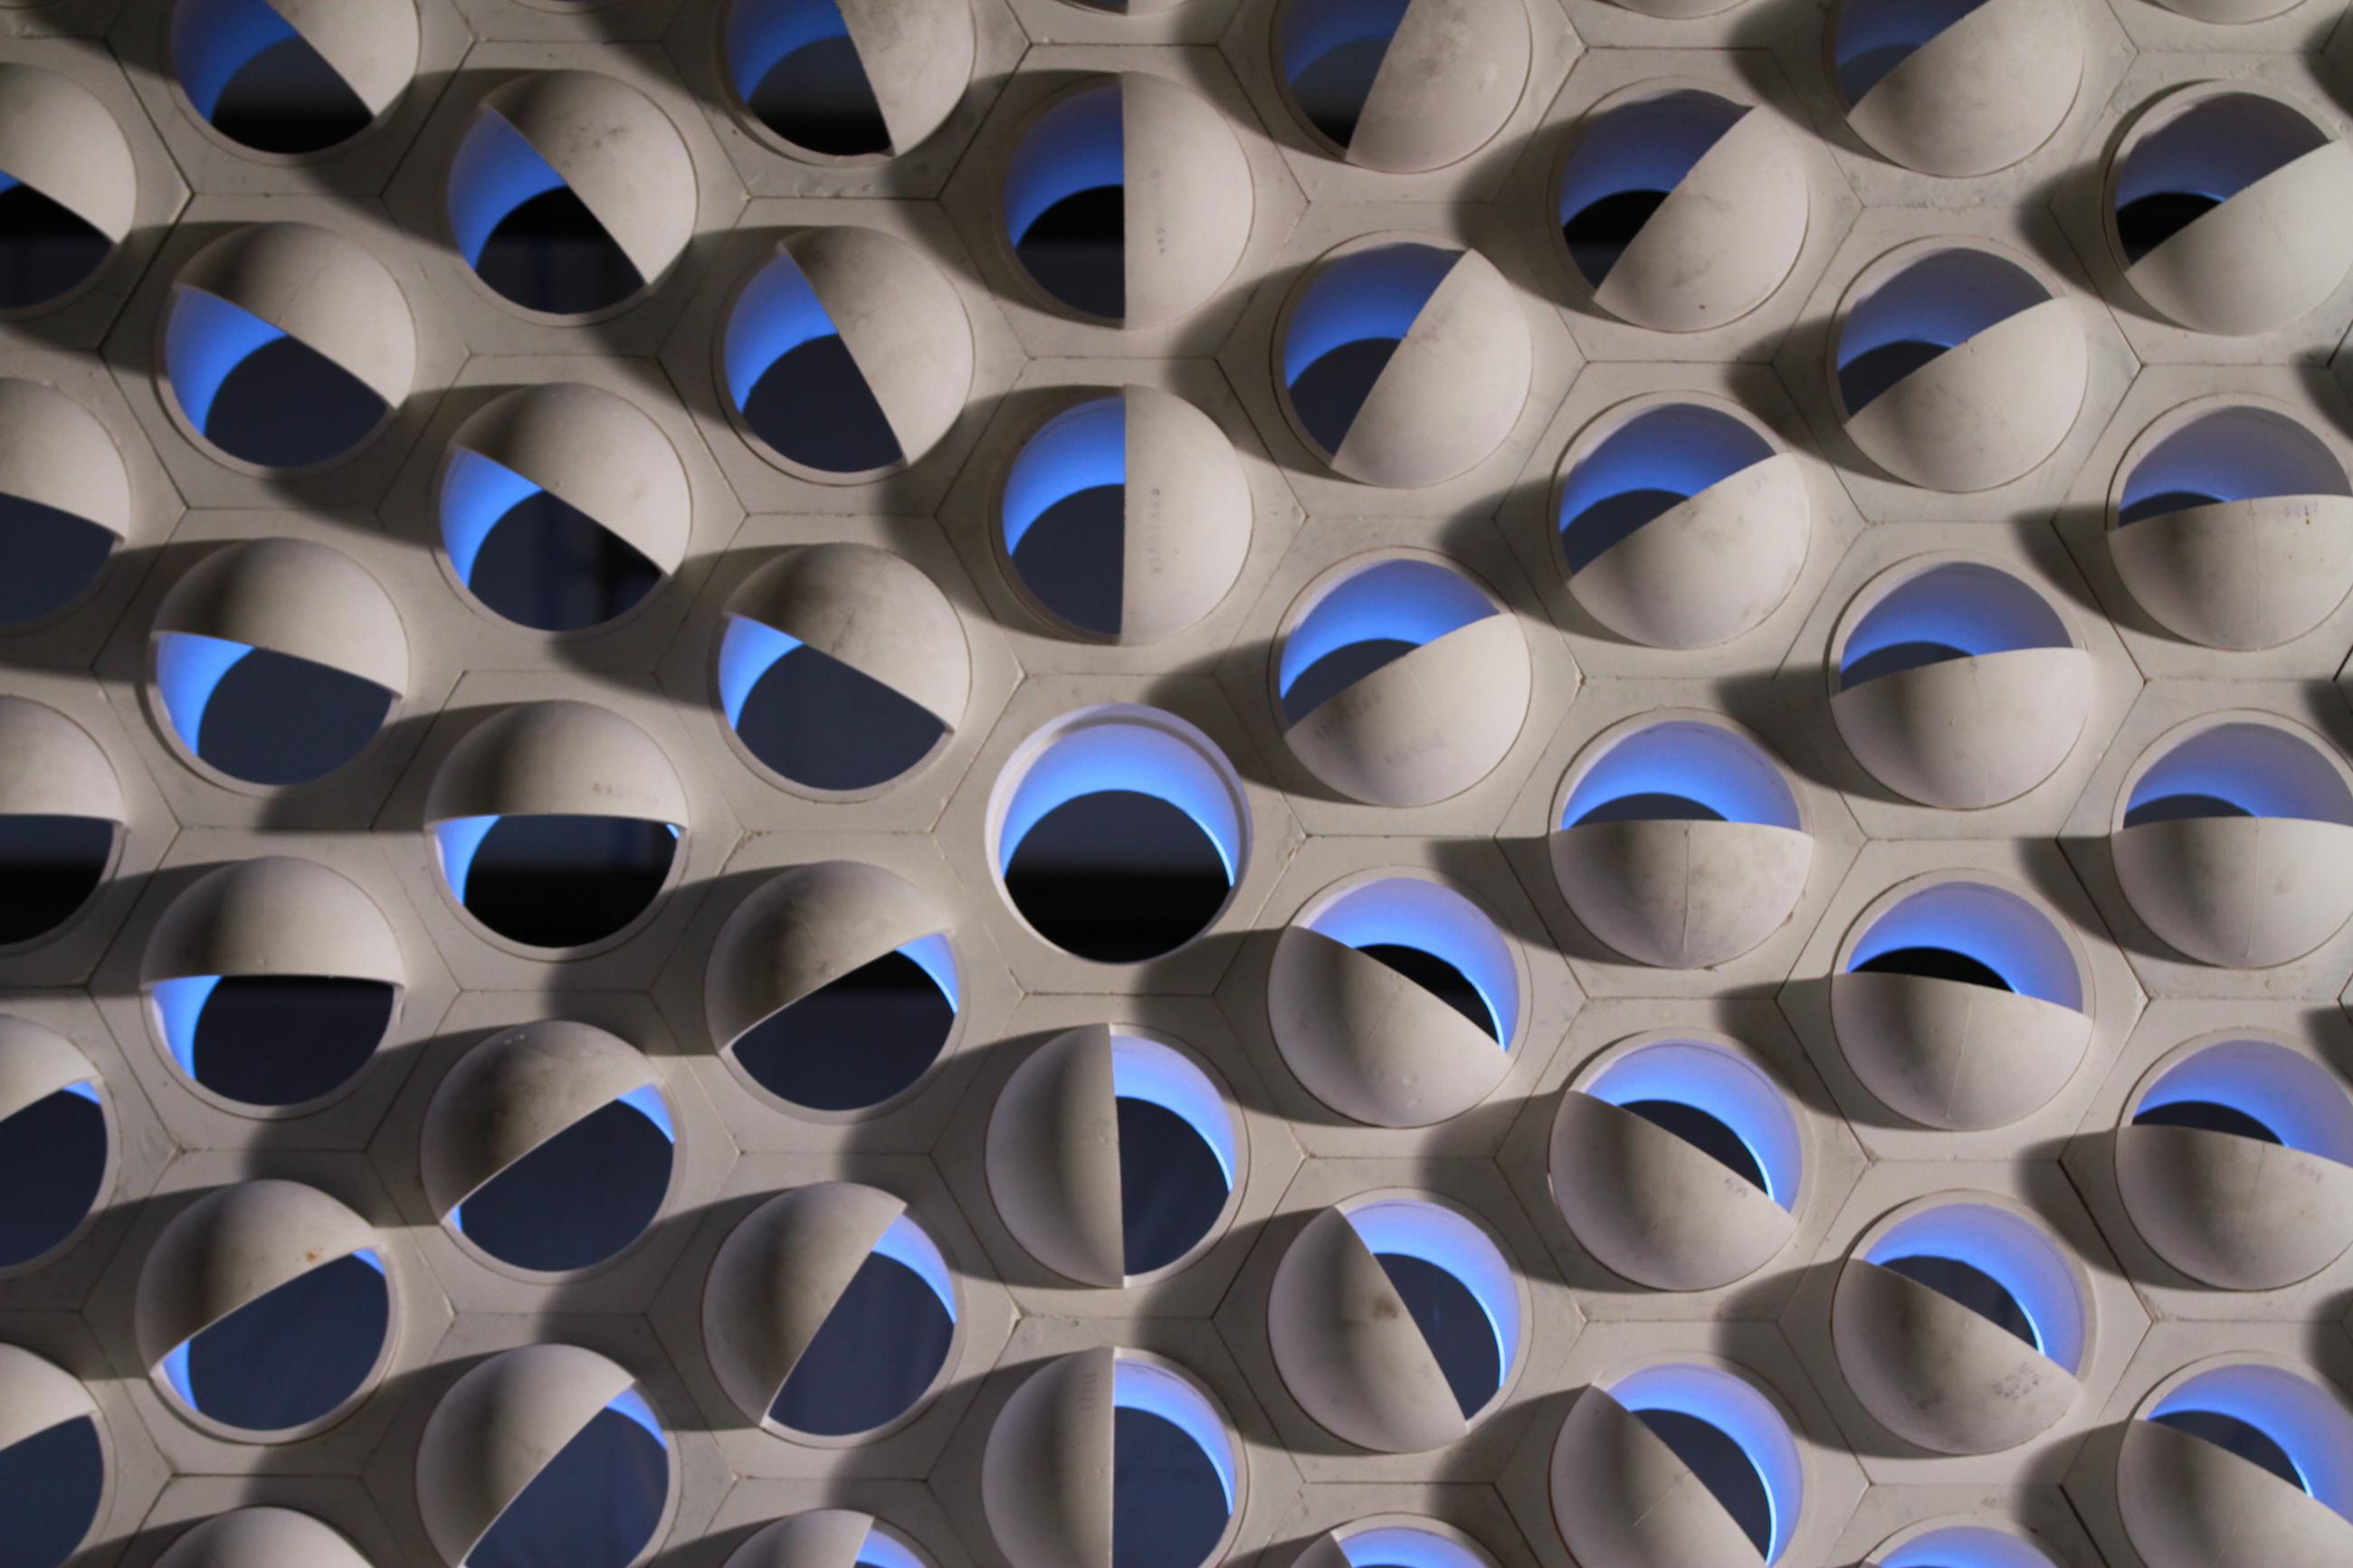 A ceramic wall backlit in blue 